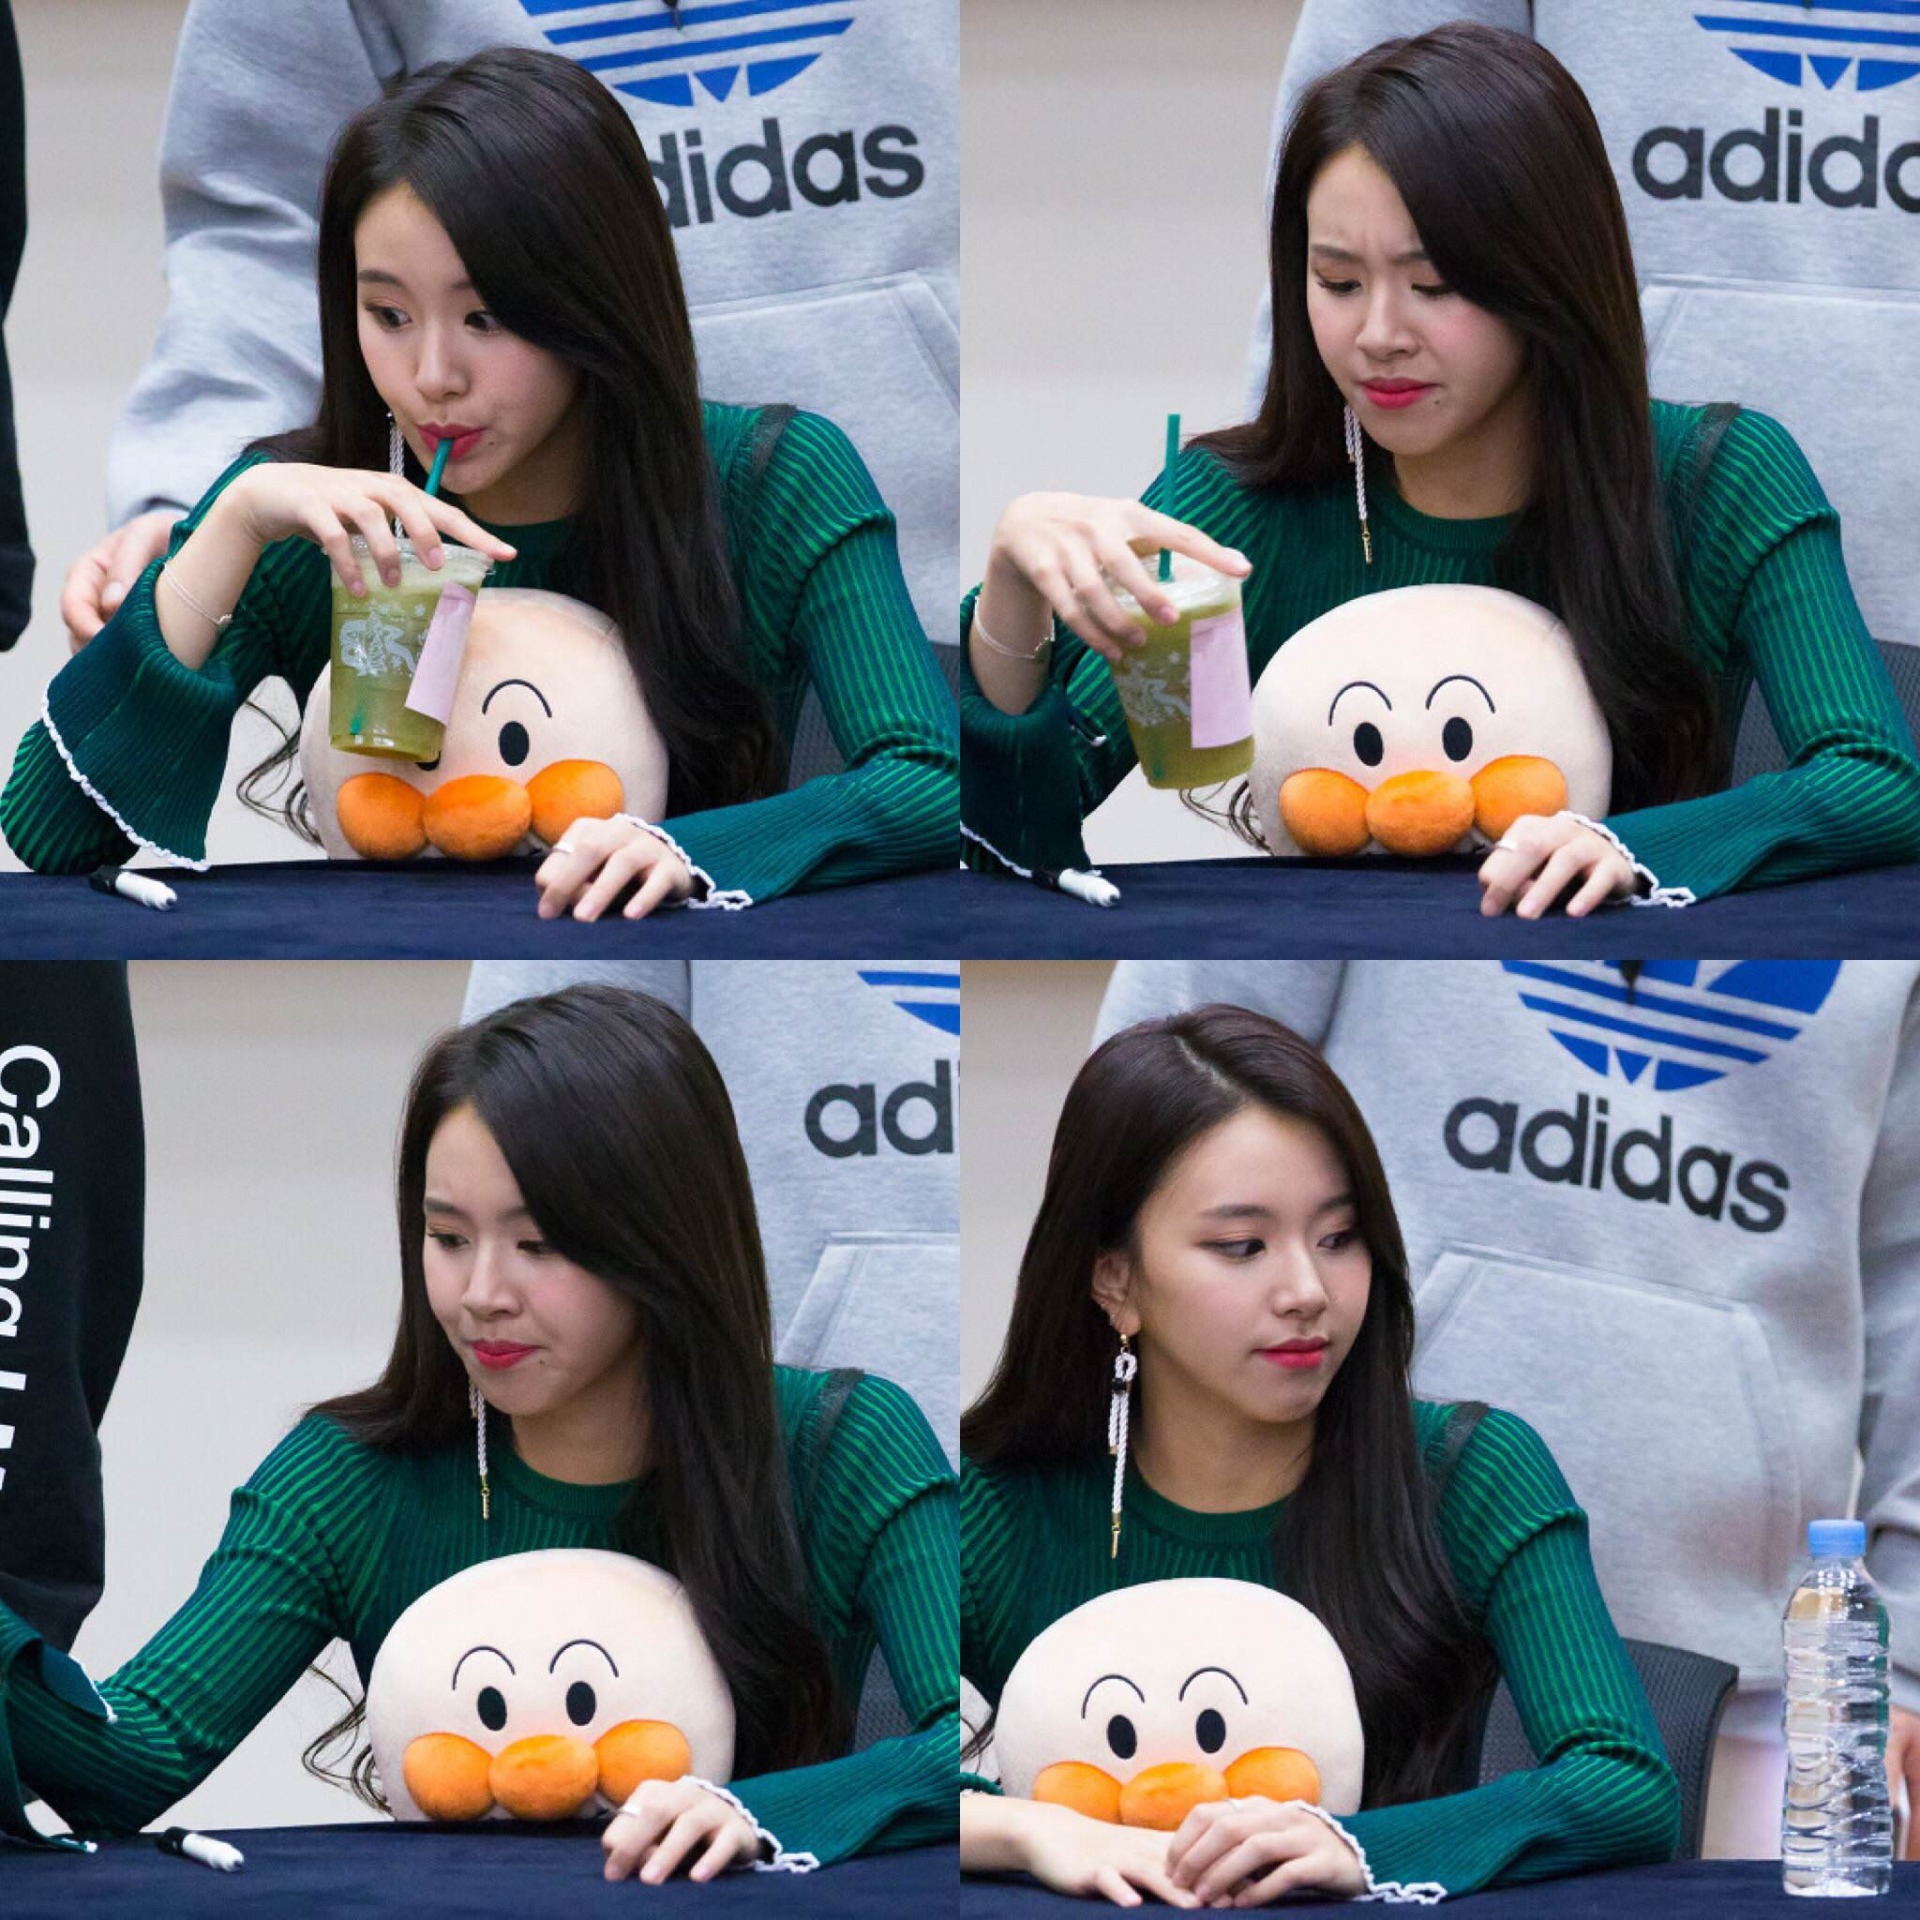 *stares at delicious water* Blank Meme Template